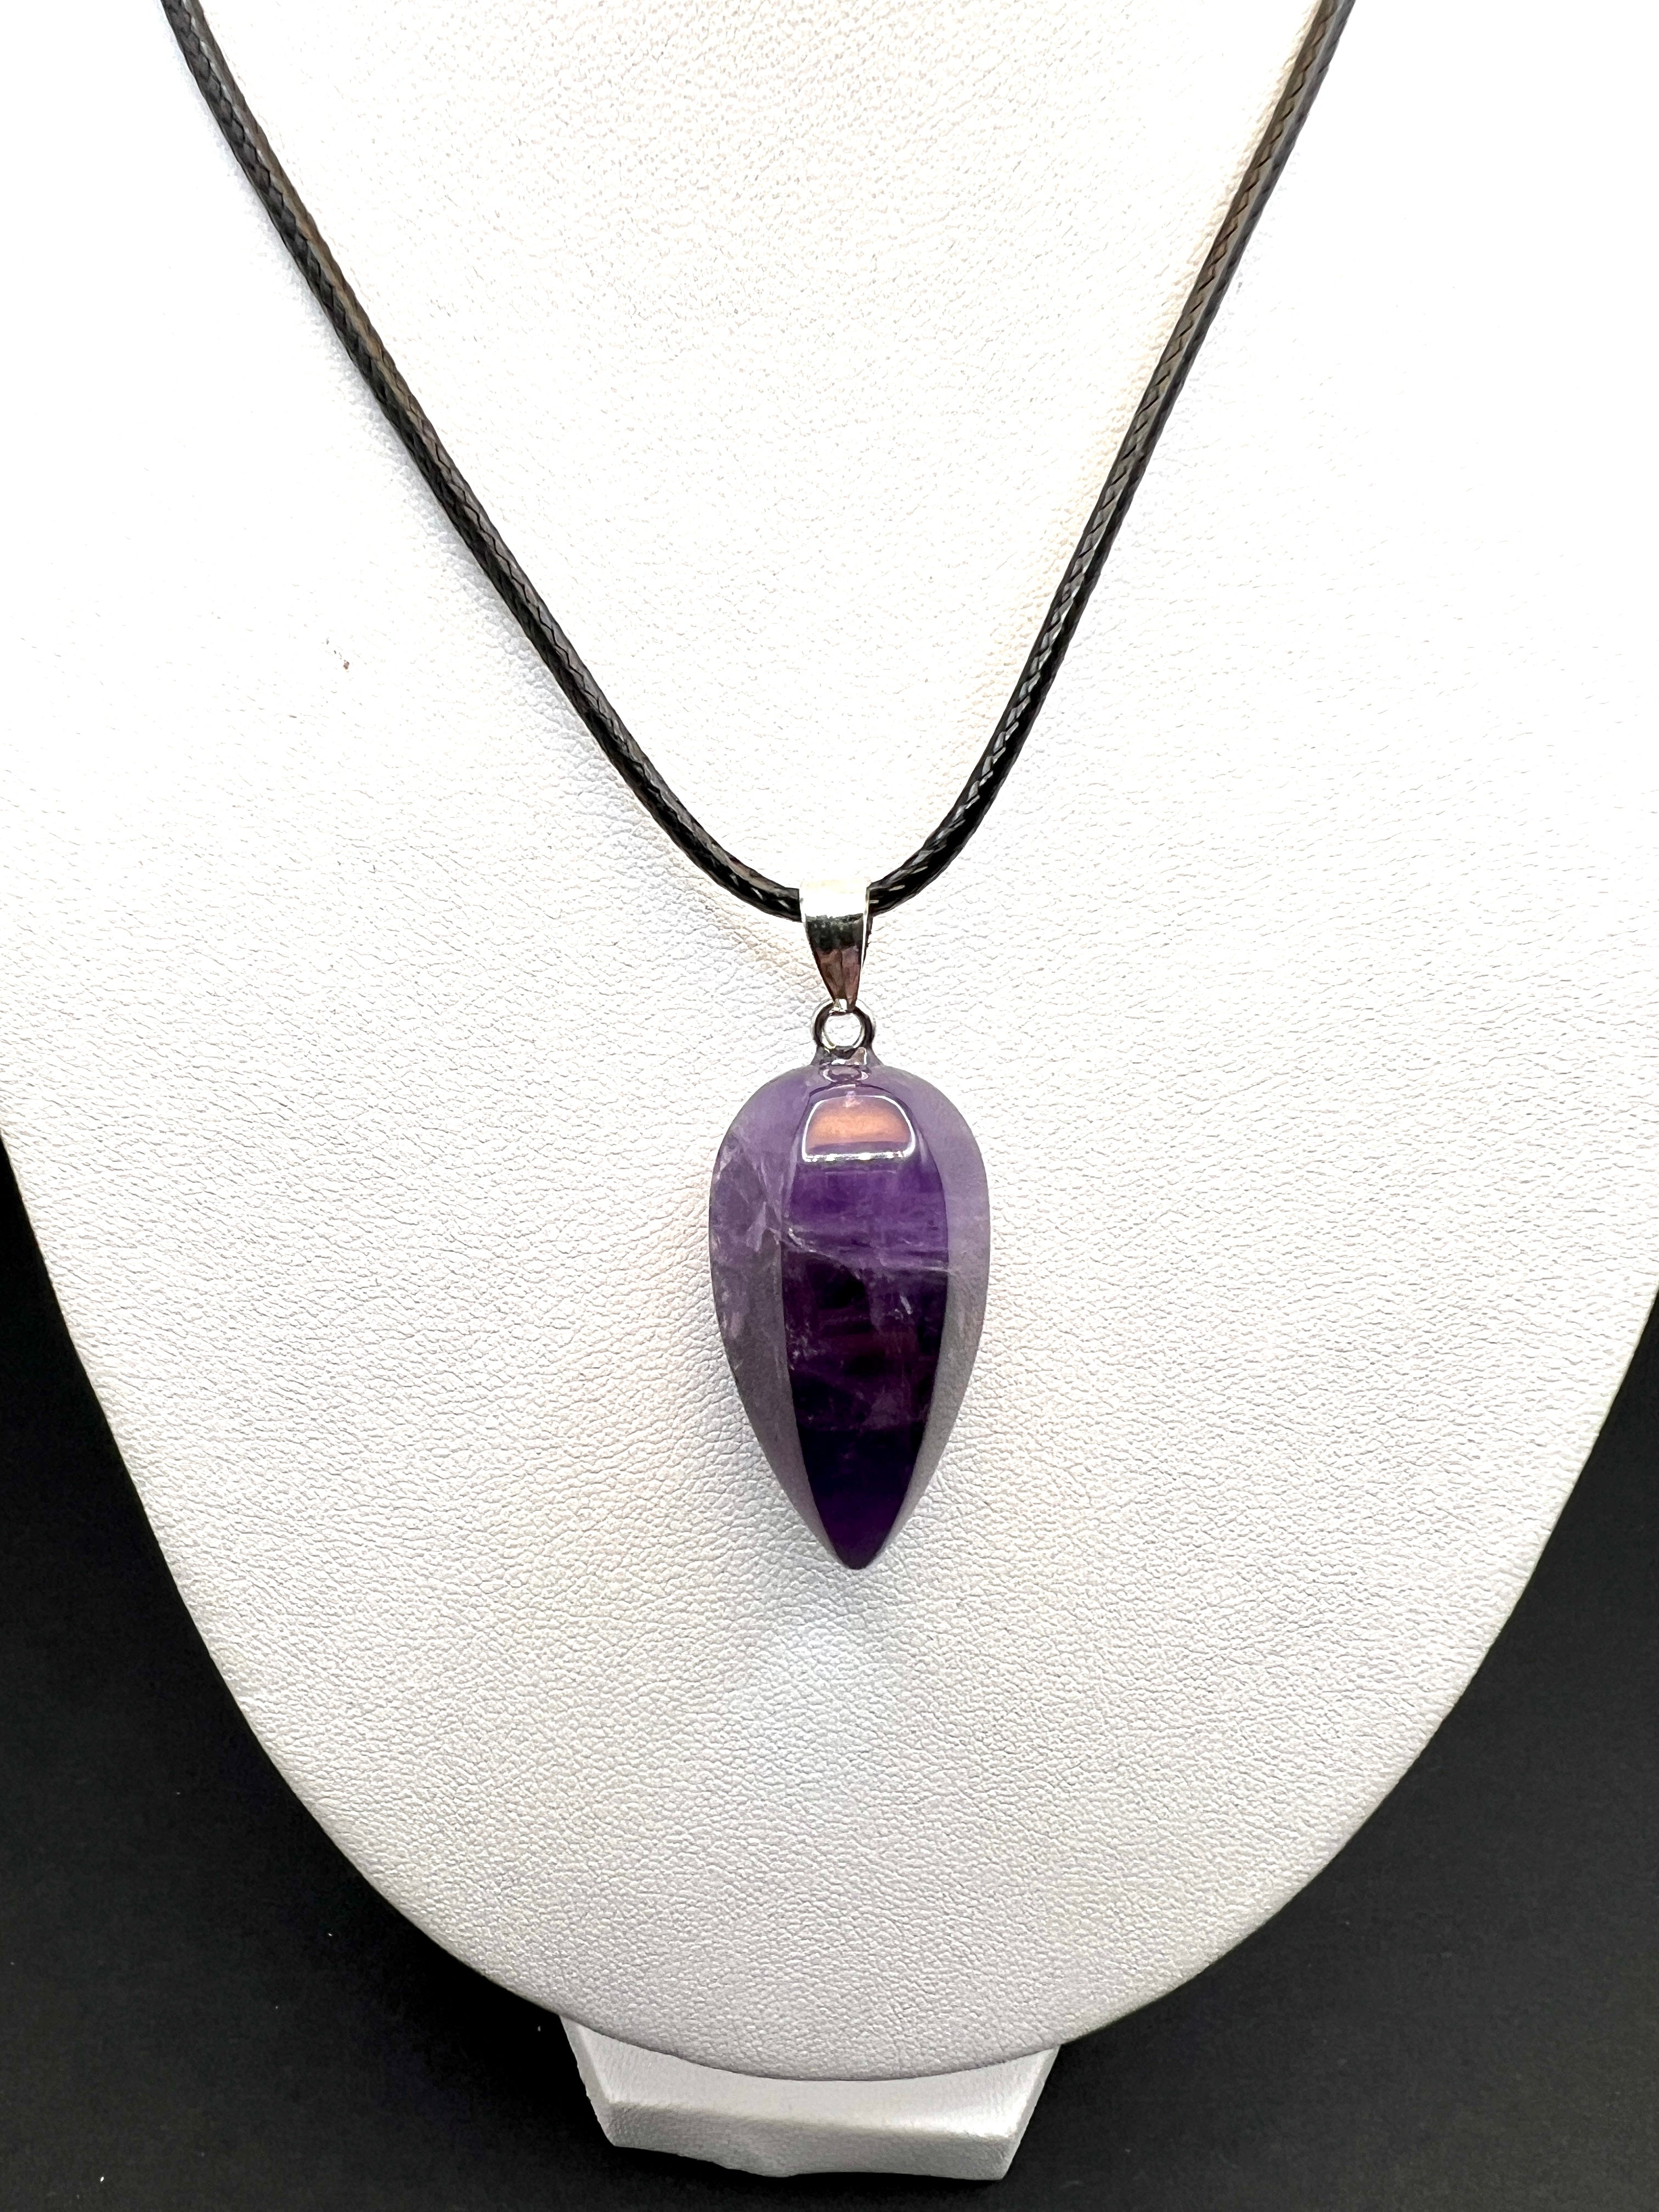 Buy Sale Raw Purple Amethyst Stone Pendant Gold Crystal Necklace, Lavender  Gemstone Chunk, Statement Jewelry Online in India - Etsy